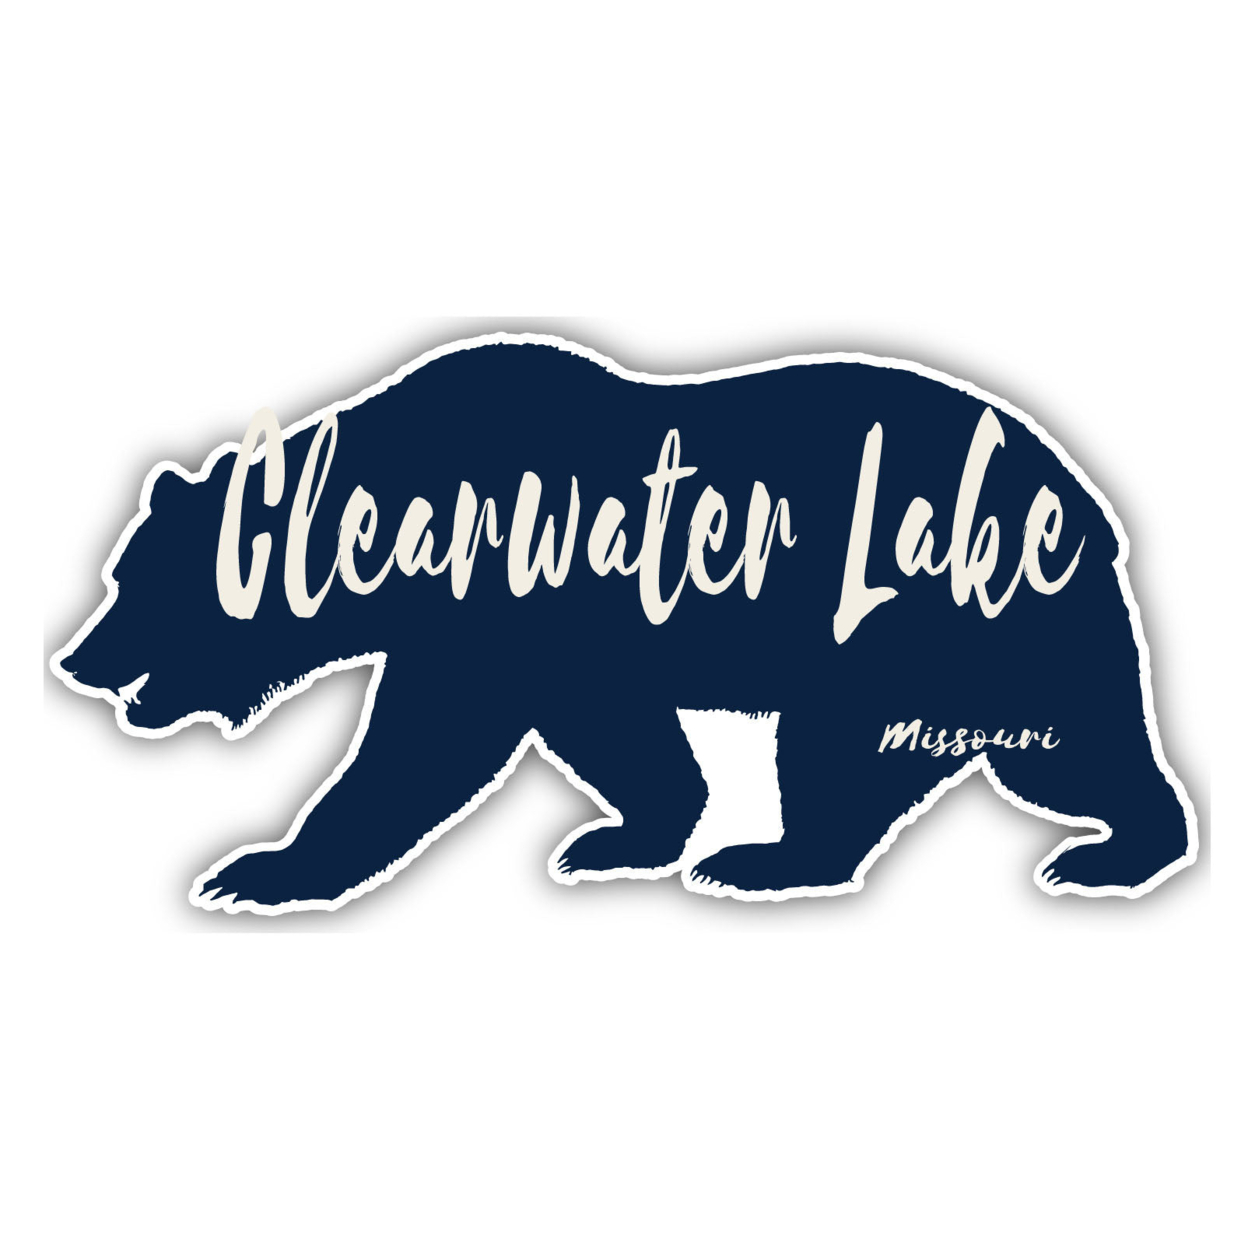 Clearwater Lake Missouri Souvenir Decorative Stickers (Choose Theme And Size) - 4-Pack, 2-Inch, Bear